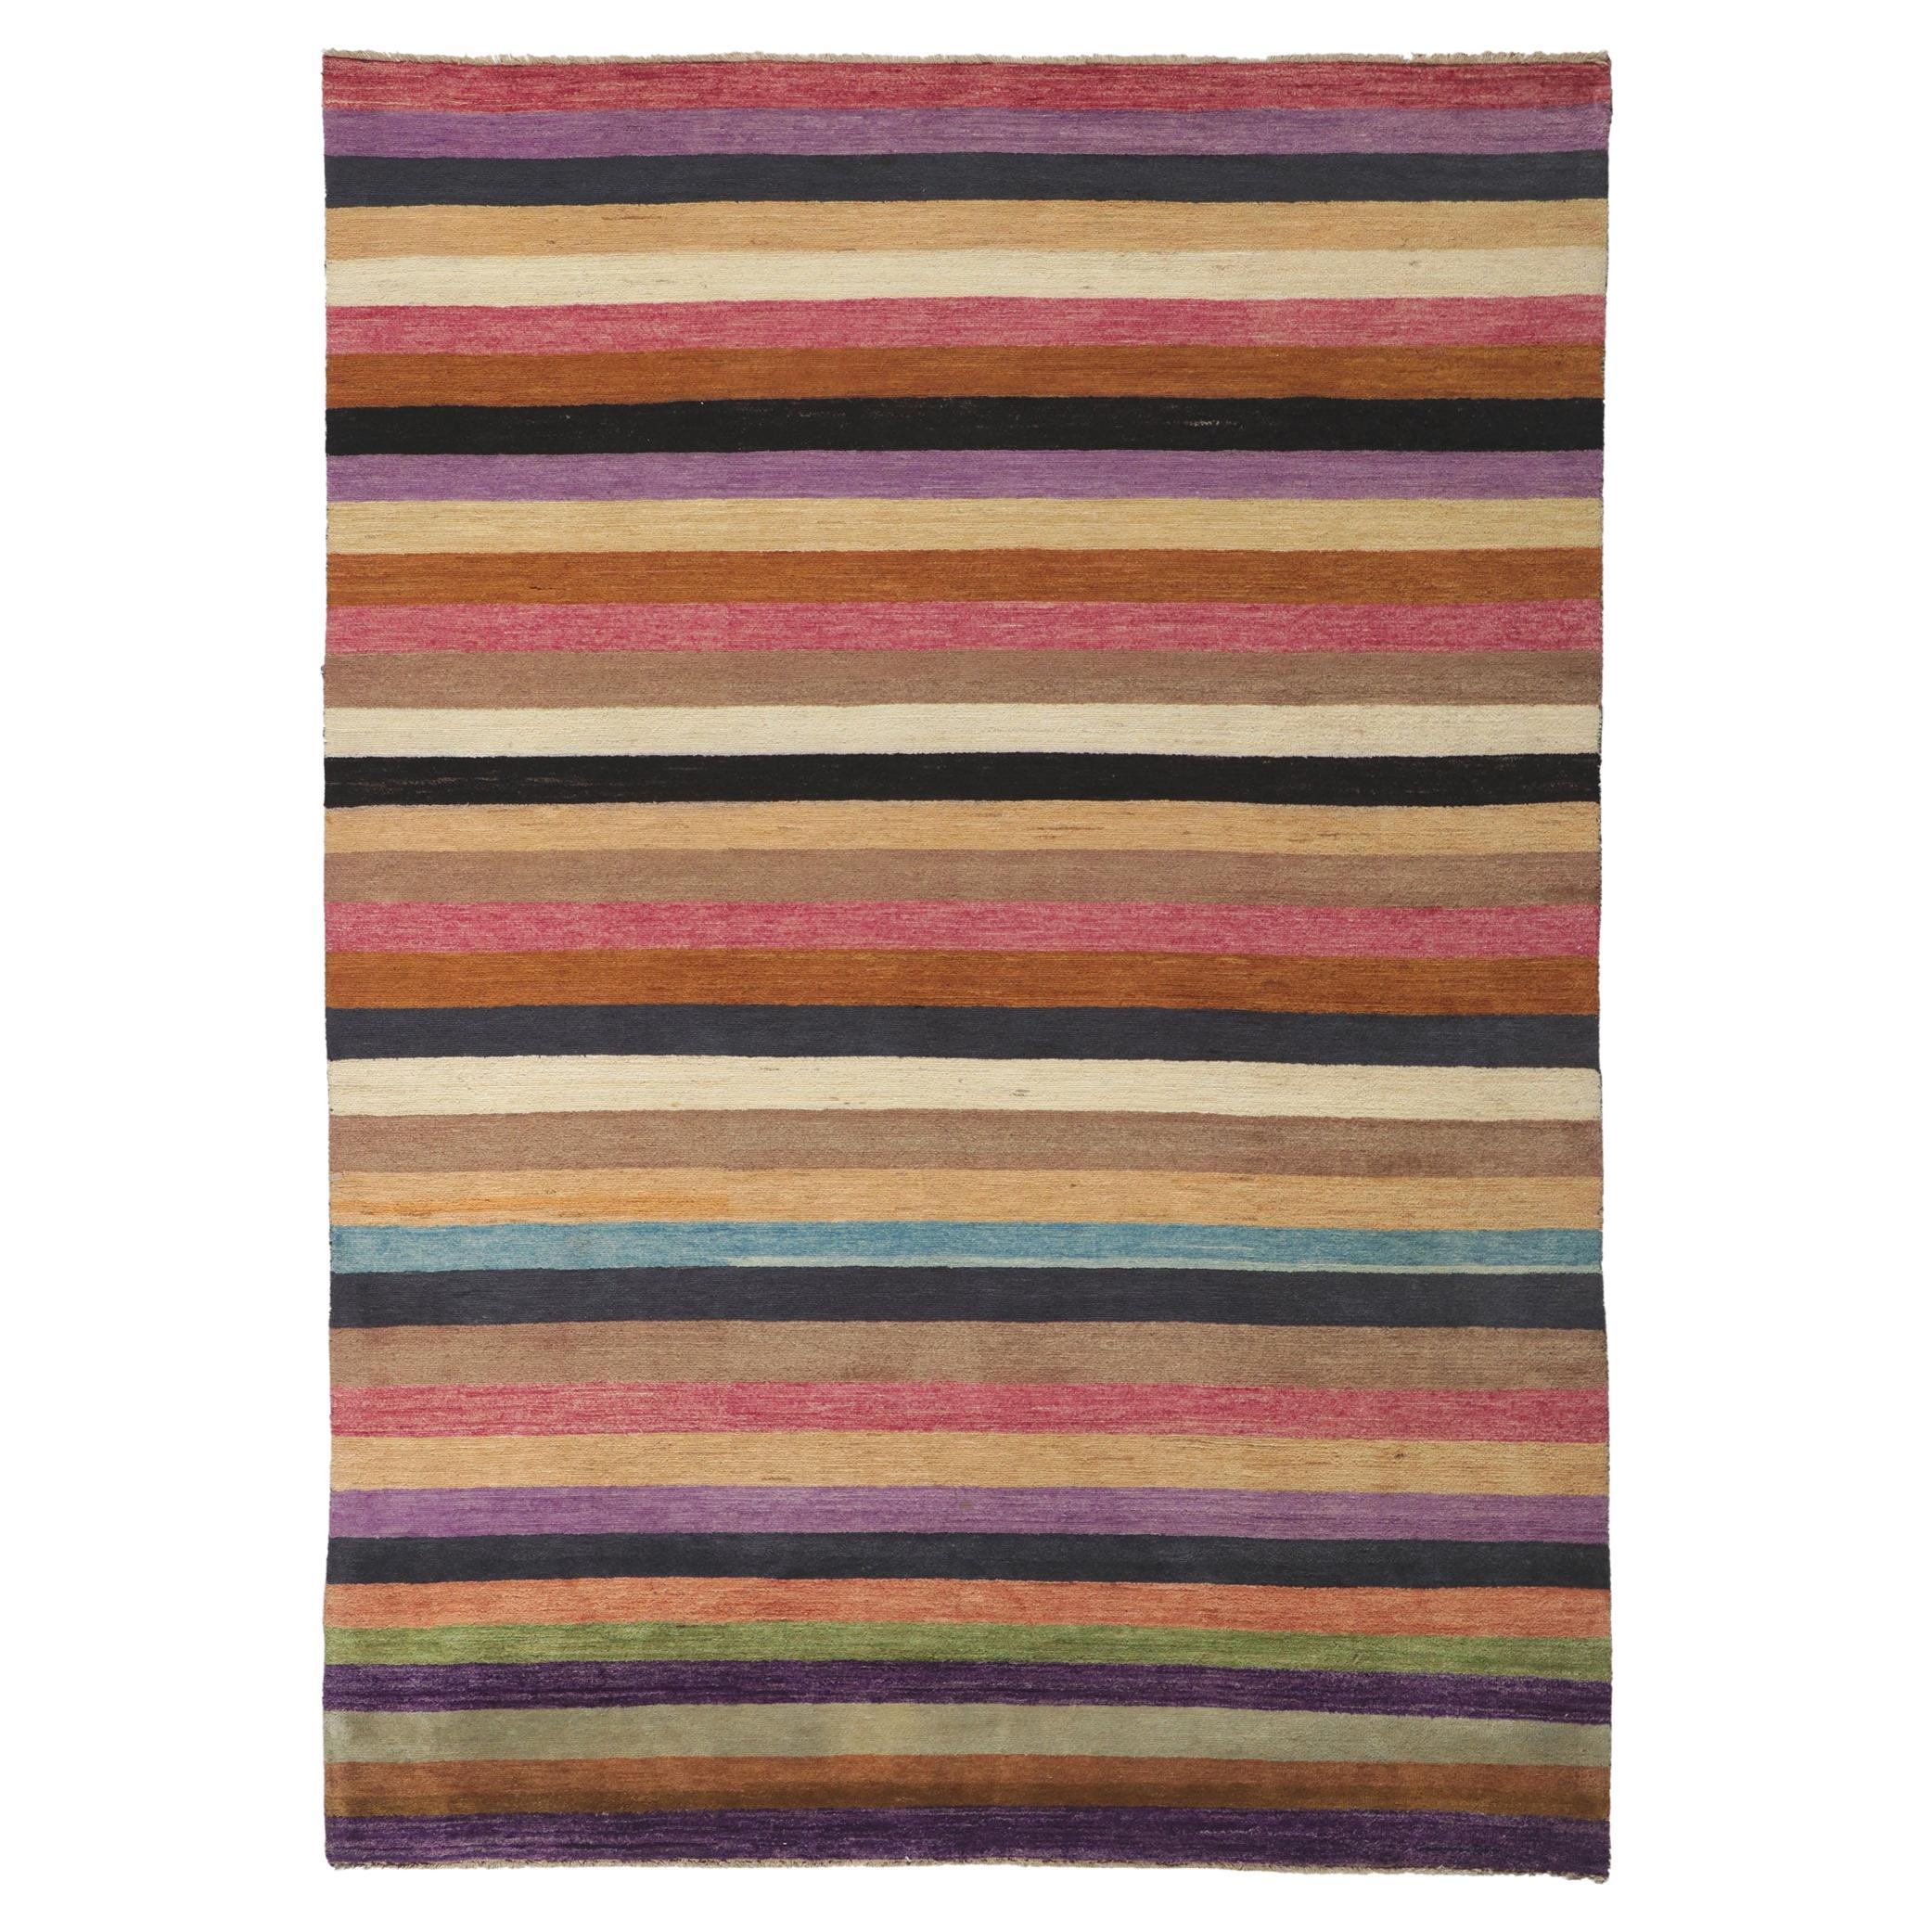 New Modern Striped Area Rug For Sale